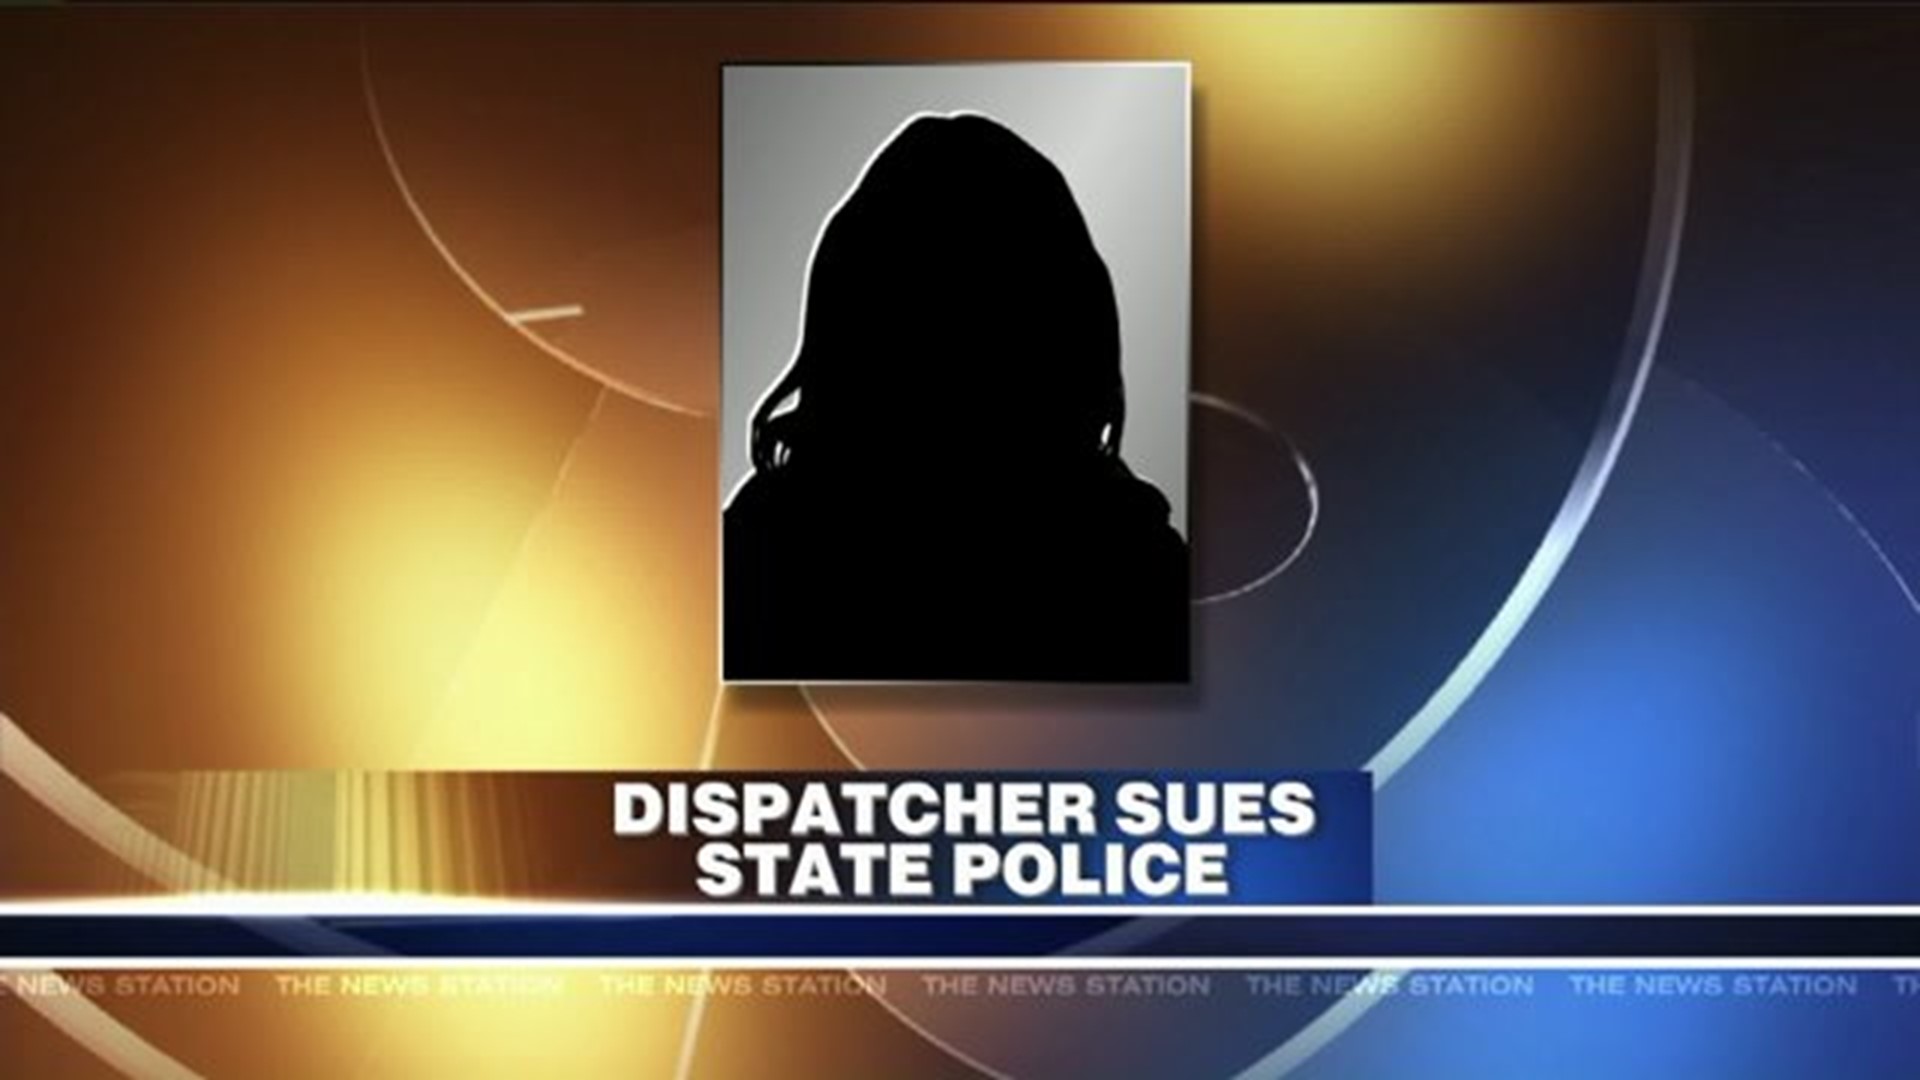 Dispatcher Sues State Police for Alleged Cover-Up